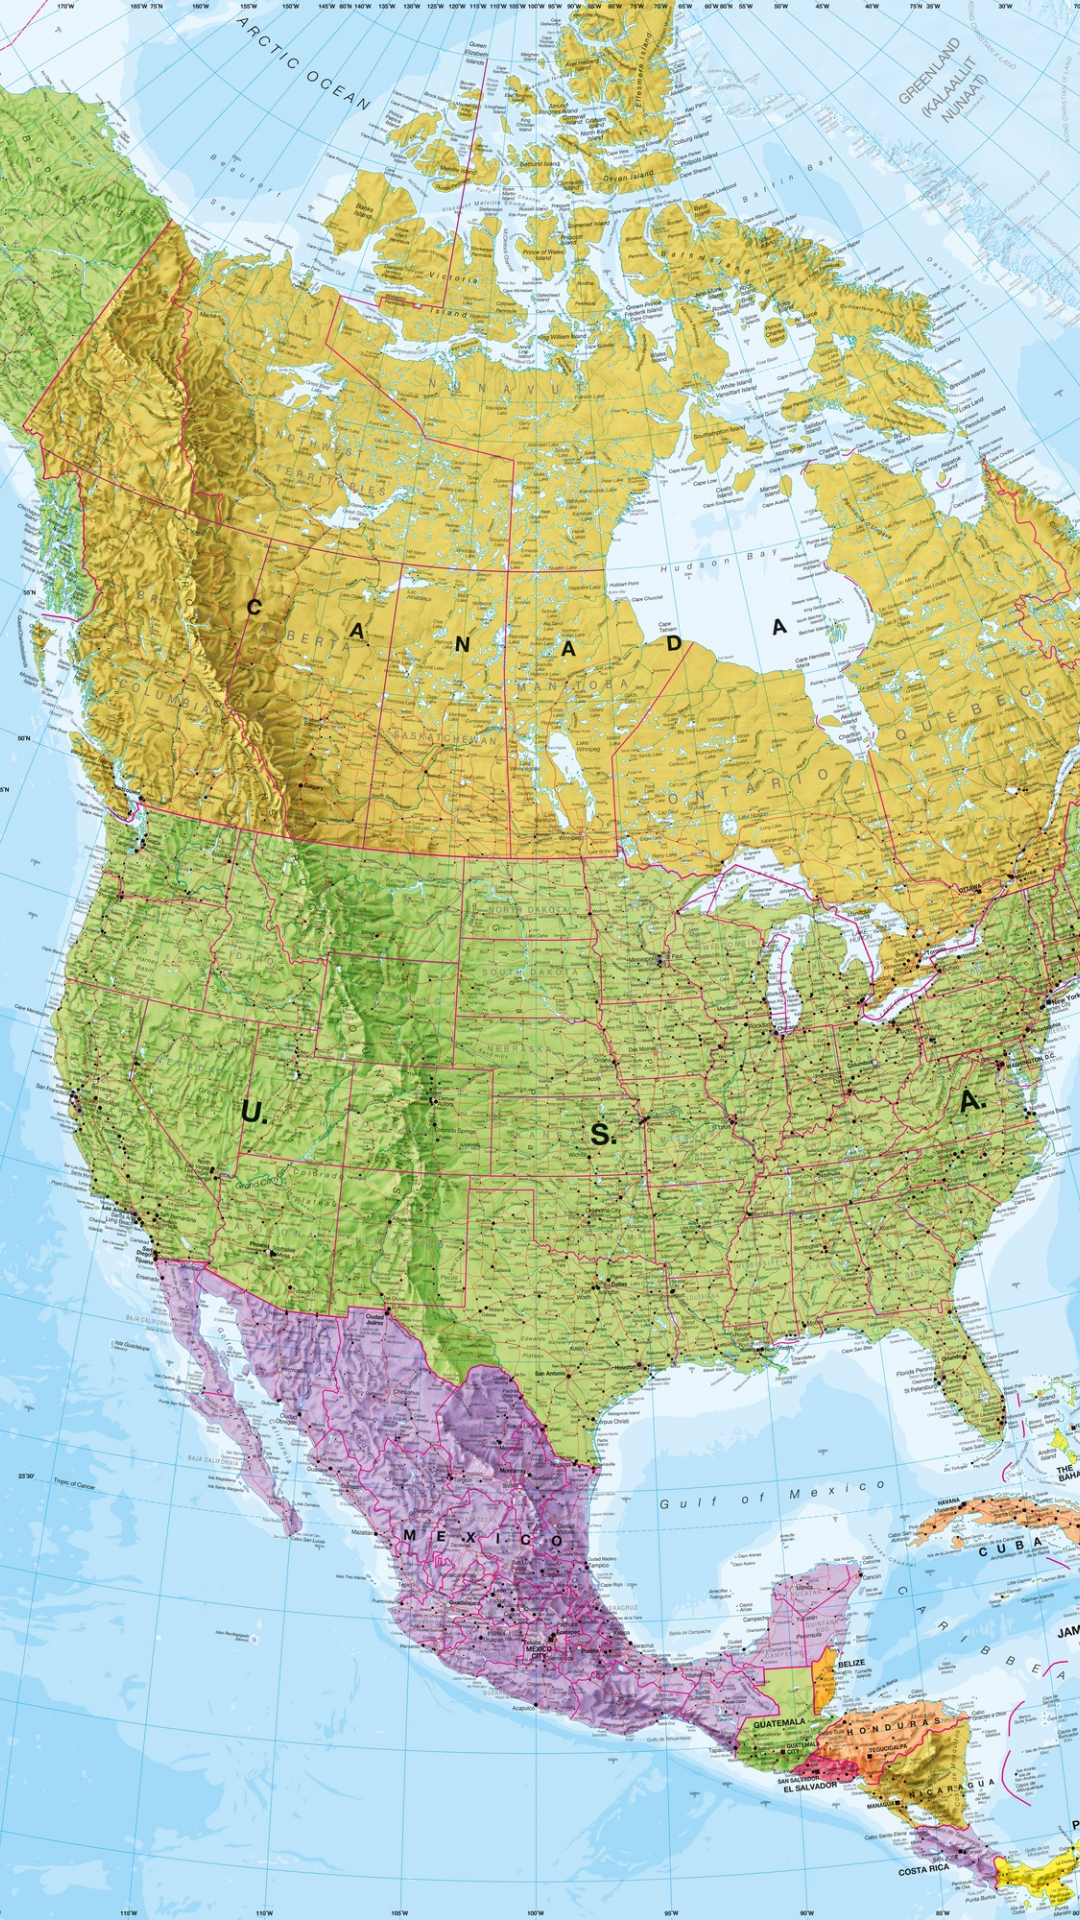 1080x1920 USA Map Wallpapers Top 35 Best USA Map Wallpapers Download